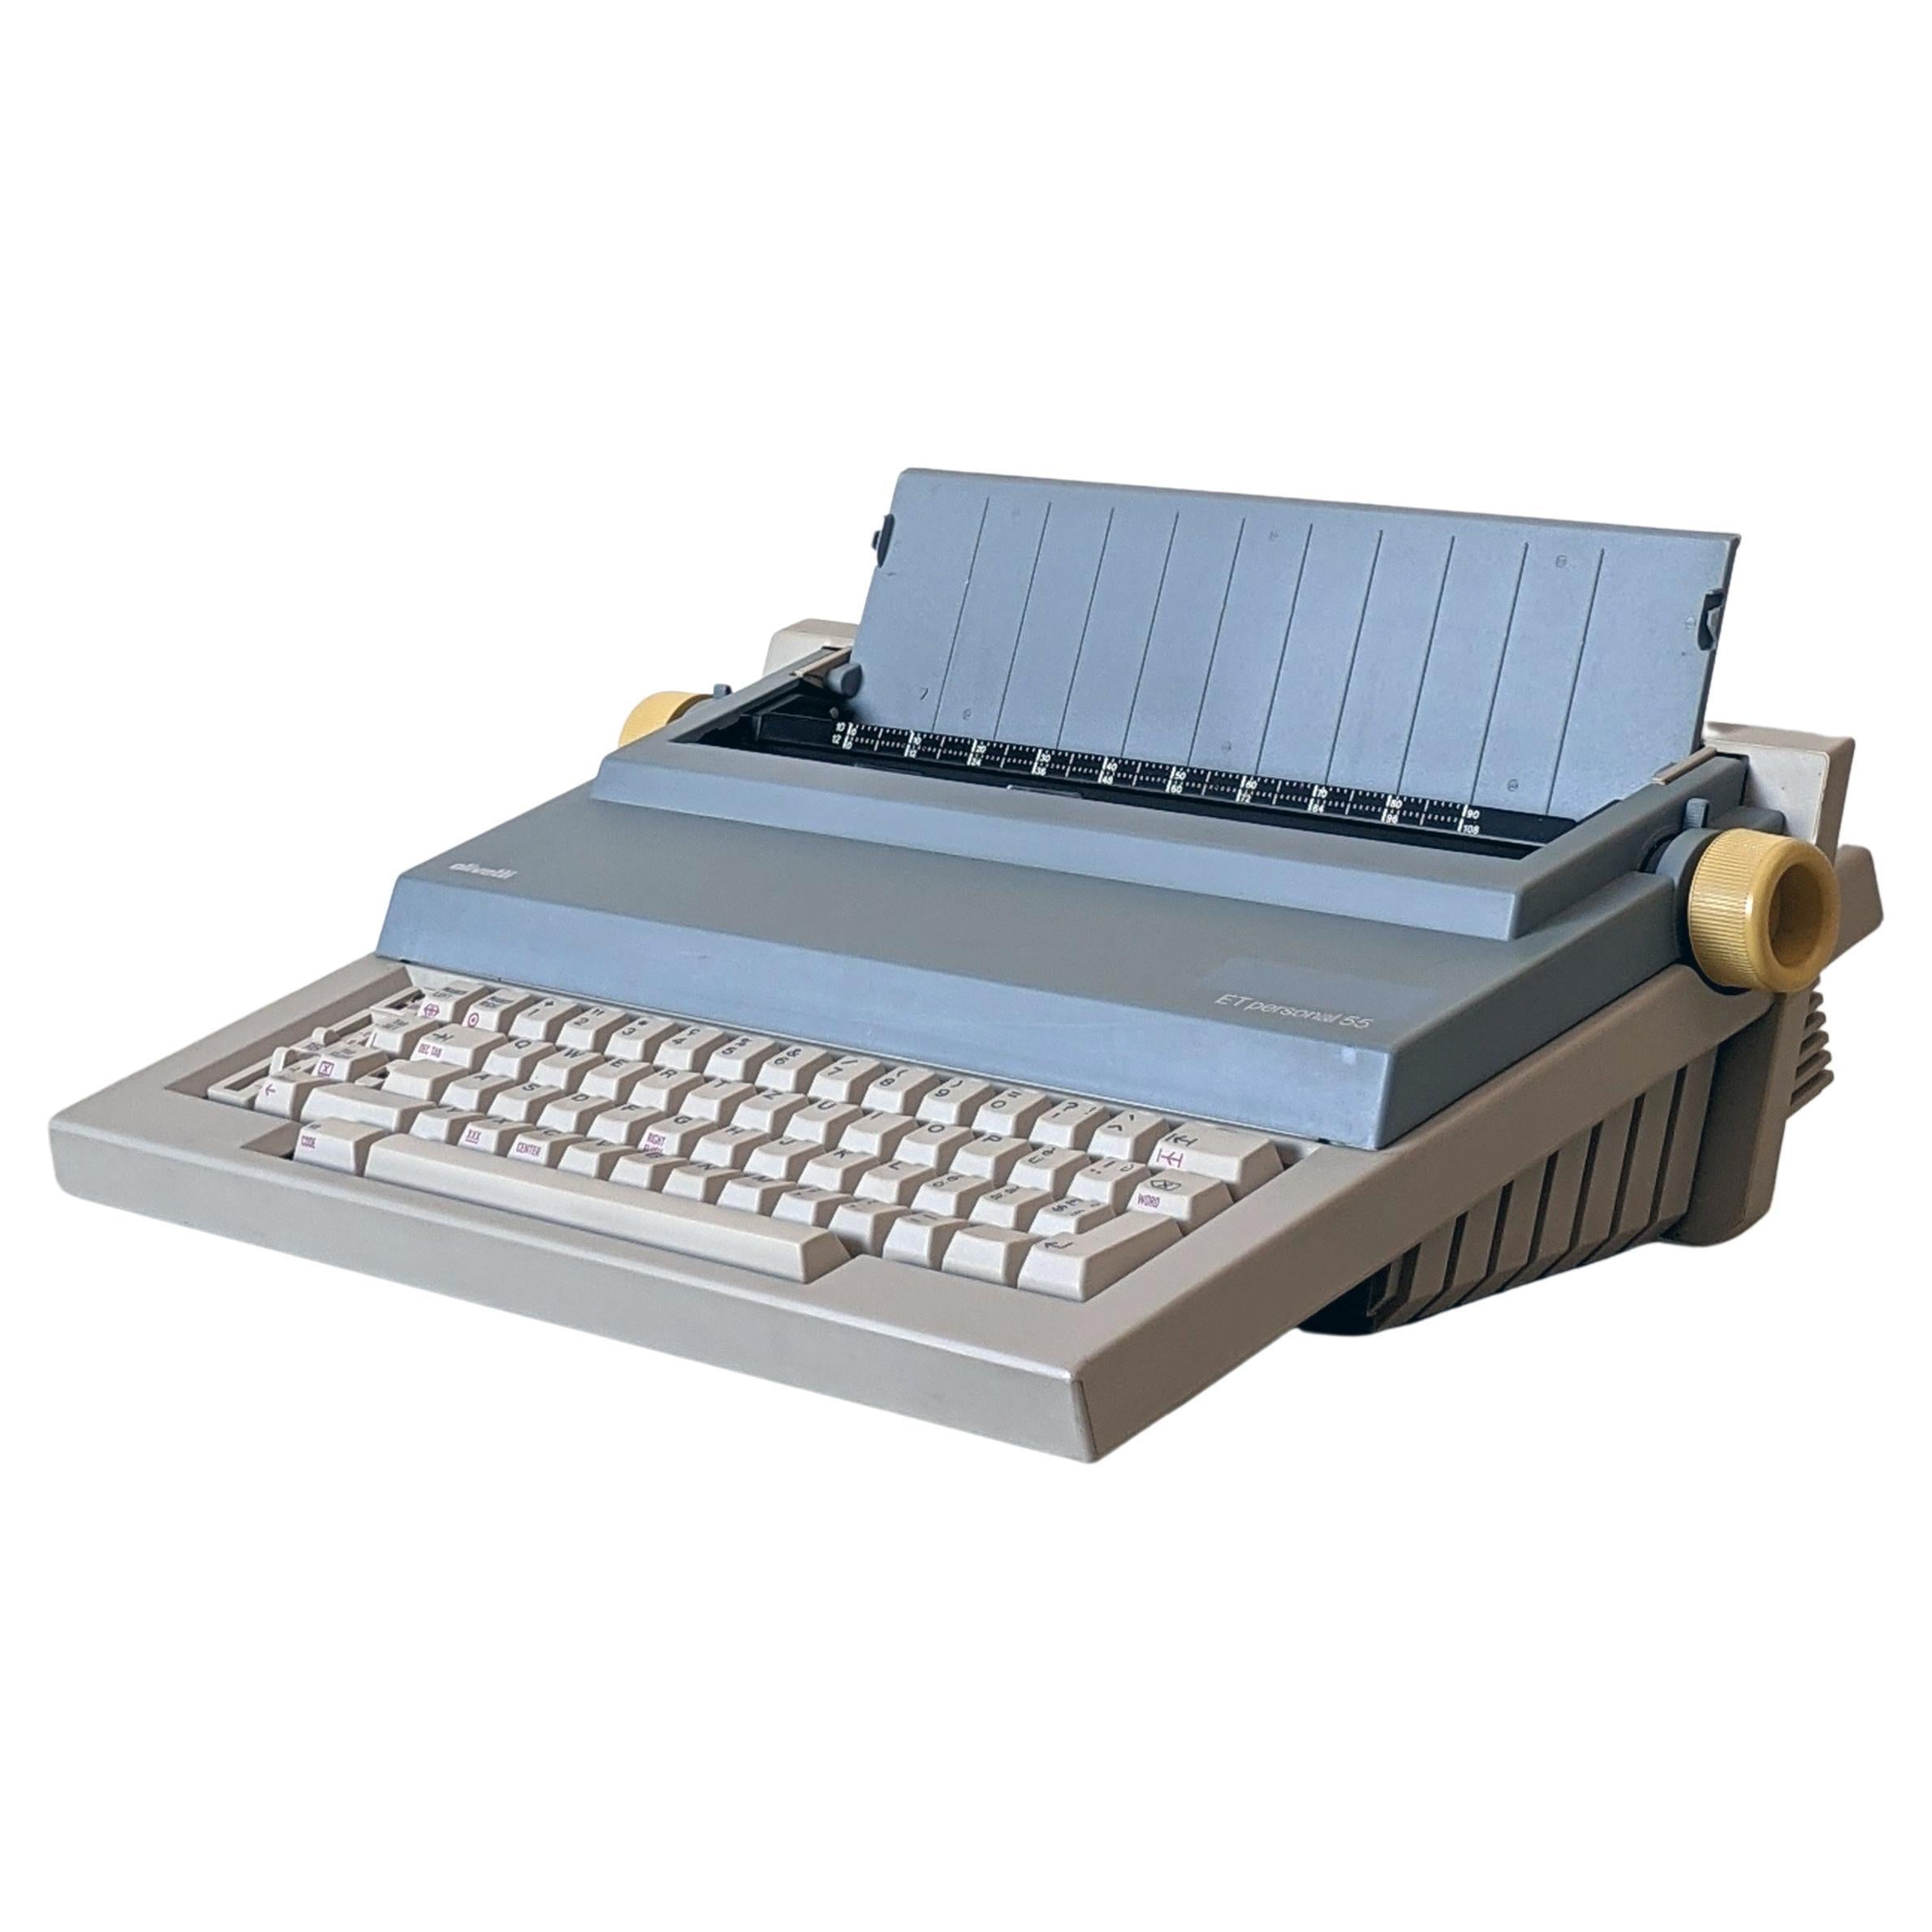 Mario Bellini, ET Personal 55 Portable Typewriter for Olivetti 1985-86 For Sale